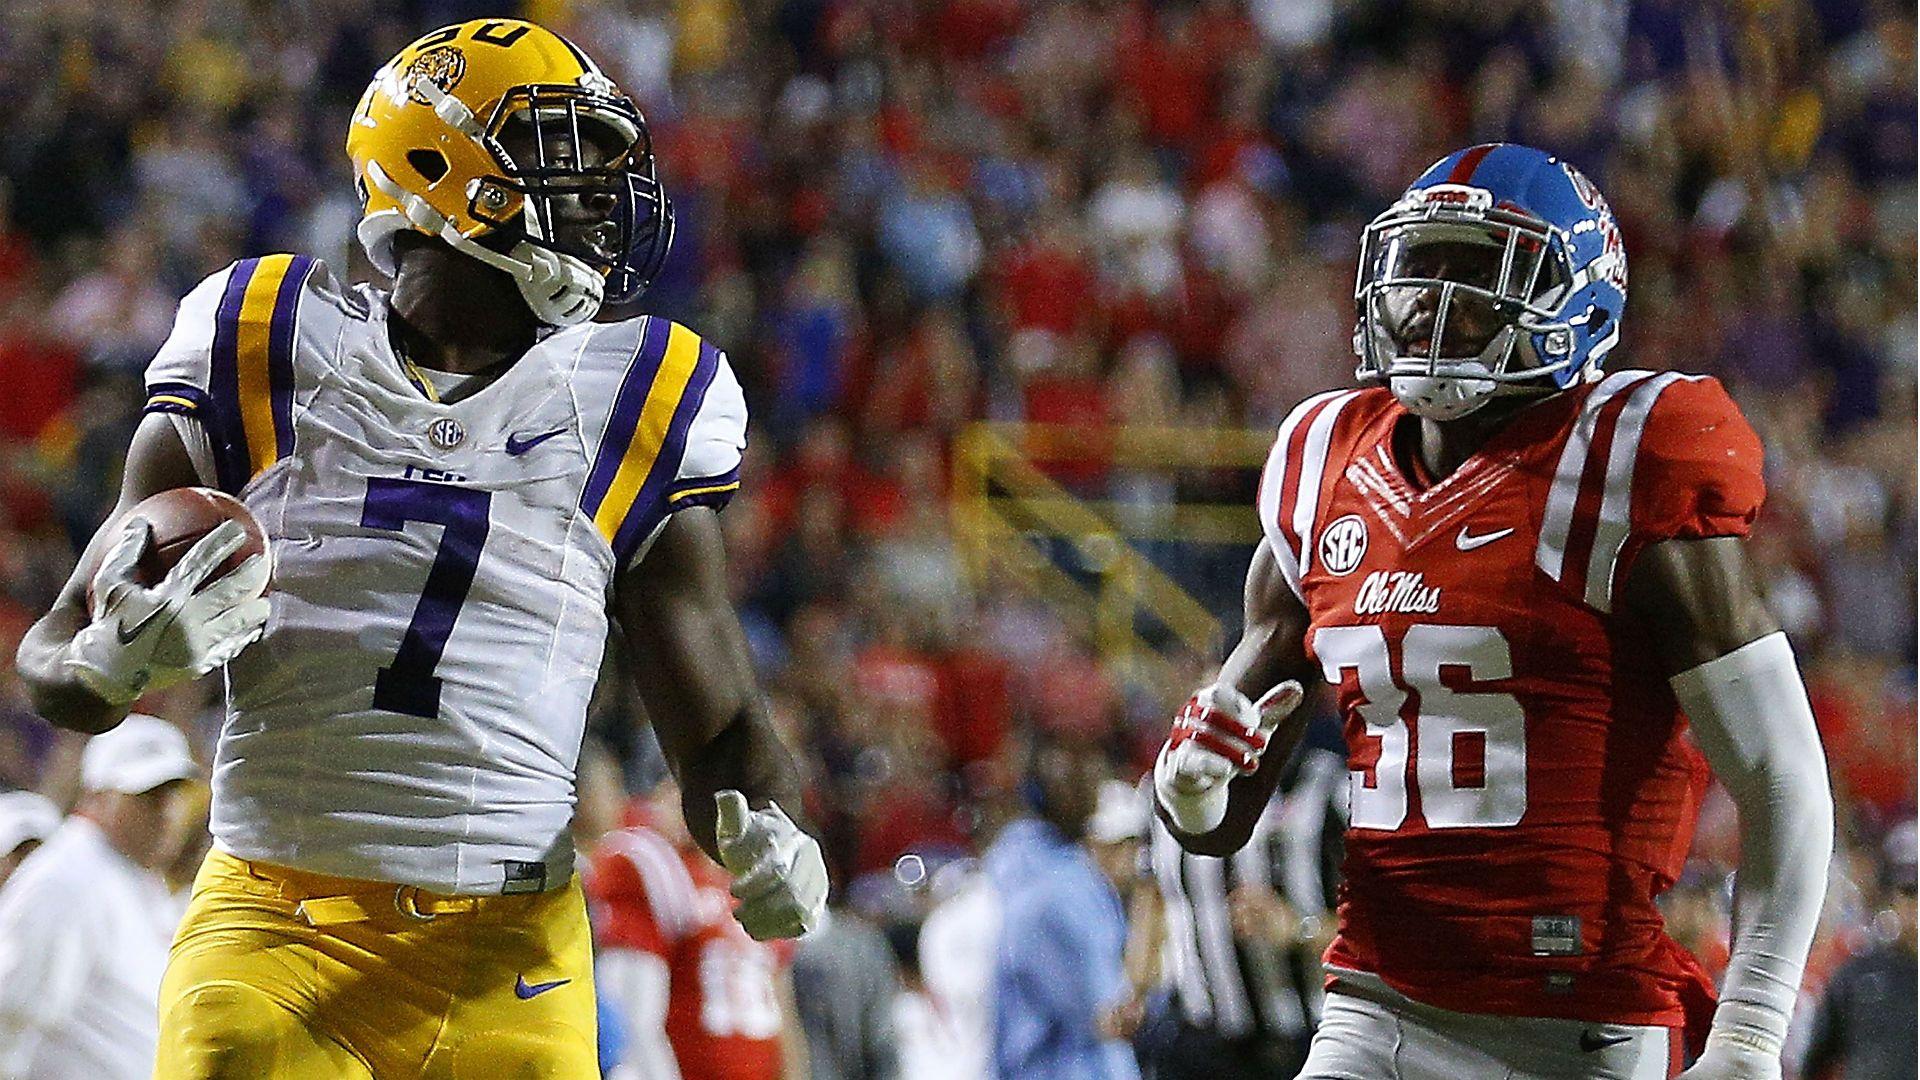 Could LSU's Leonard Fournette rush back into Heisman race after